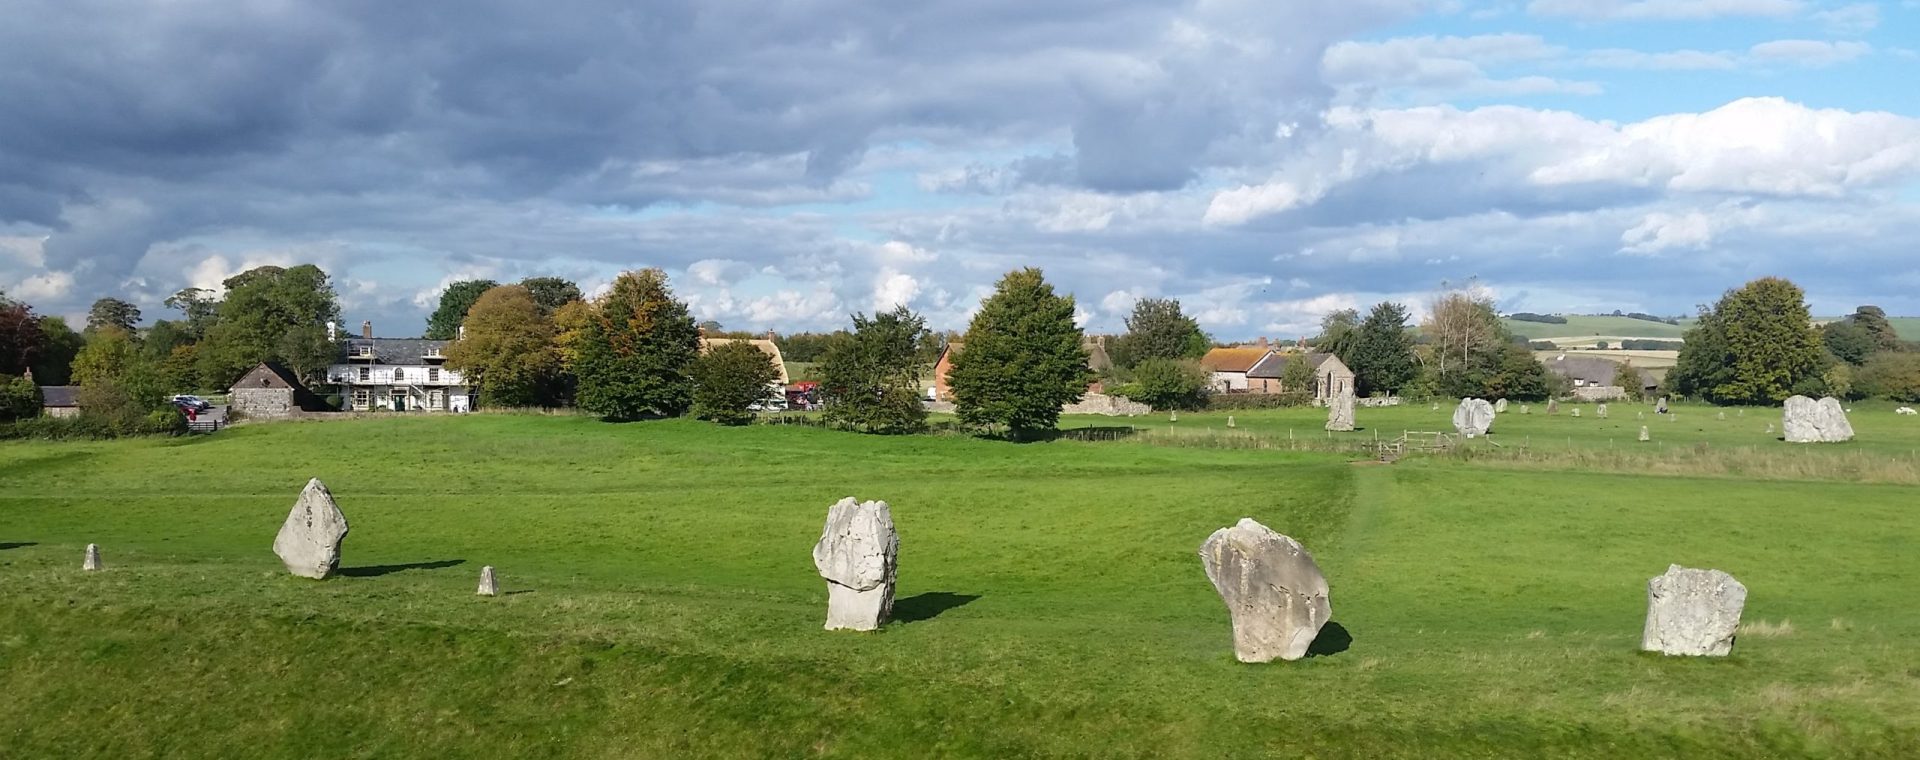 A view across Avebury stones on a fresh spring day. Ancient stones rise from the fresh green grass, trees and picturesque village buildings in the distance.